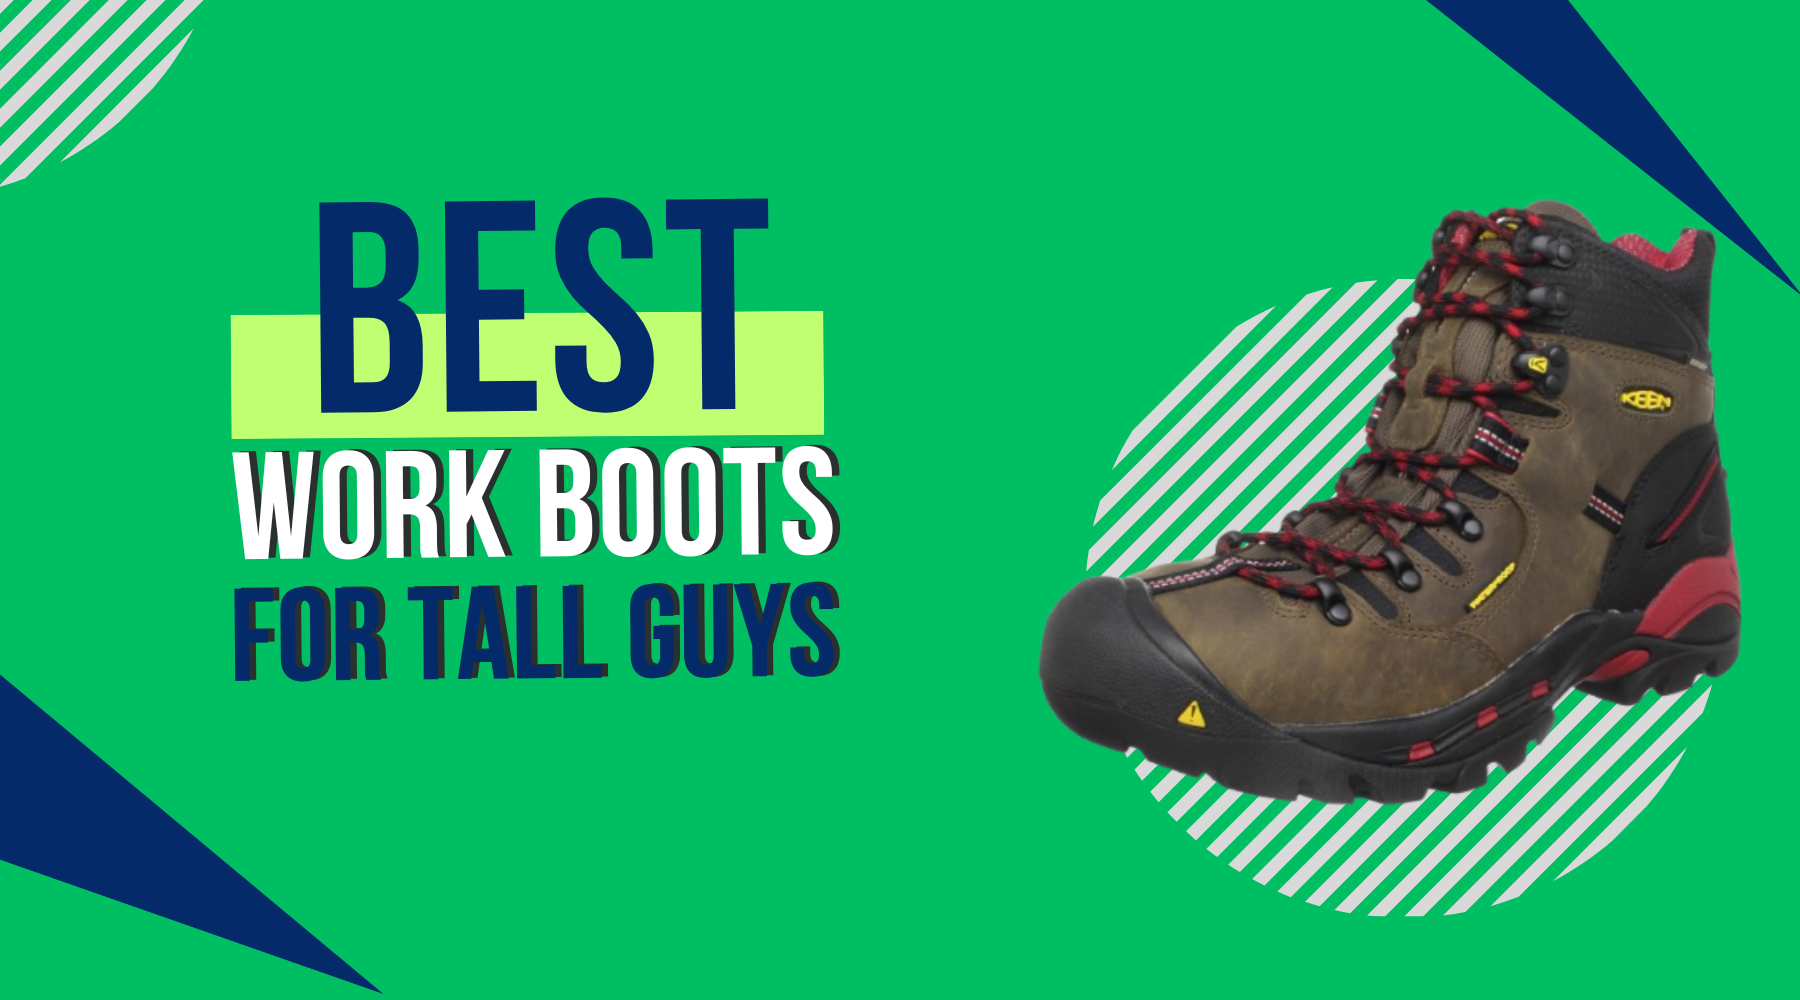 Best Work Boots For Tall & Heavy Guys